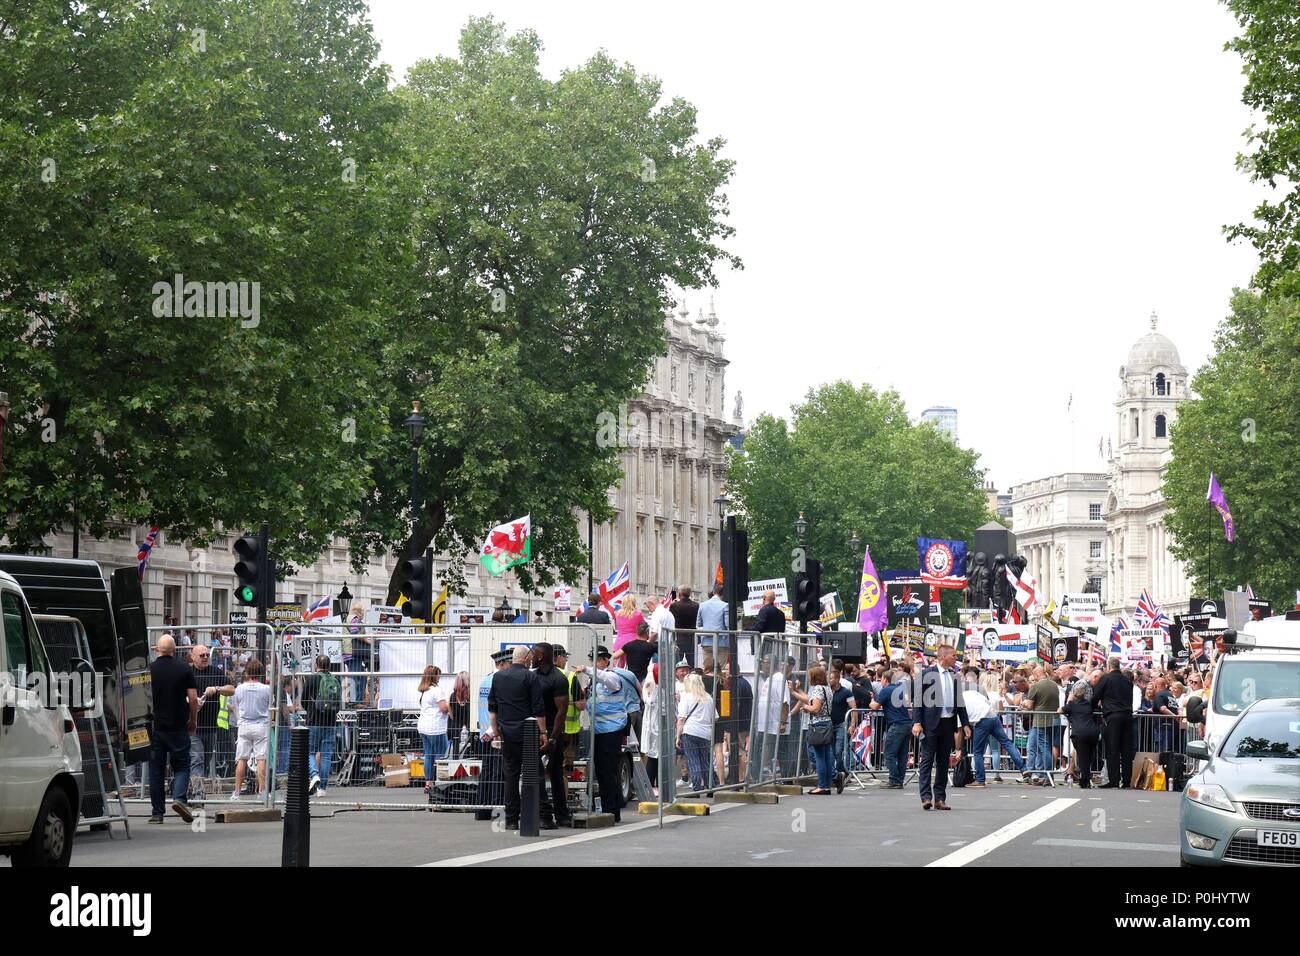 London, UK. 9th June 2018. Free Tommy Robinson March in London, UK with thousands of people marching and waving flags and plaques, police also in attendance at this event with riot wear. Credit: Michelle Bridges/Alamy Live News Stock Photo